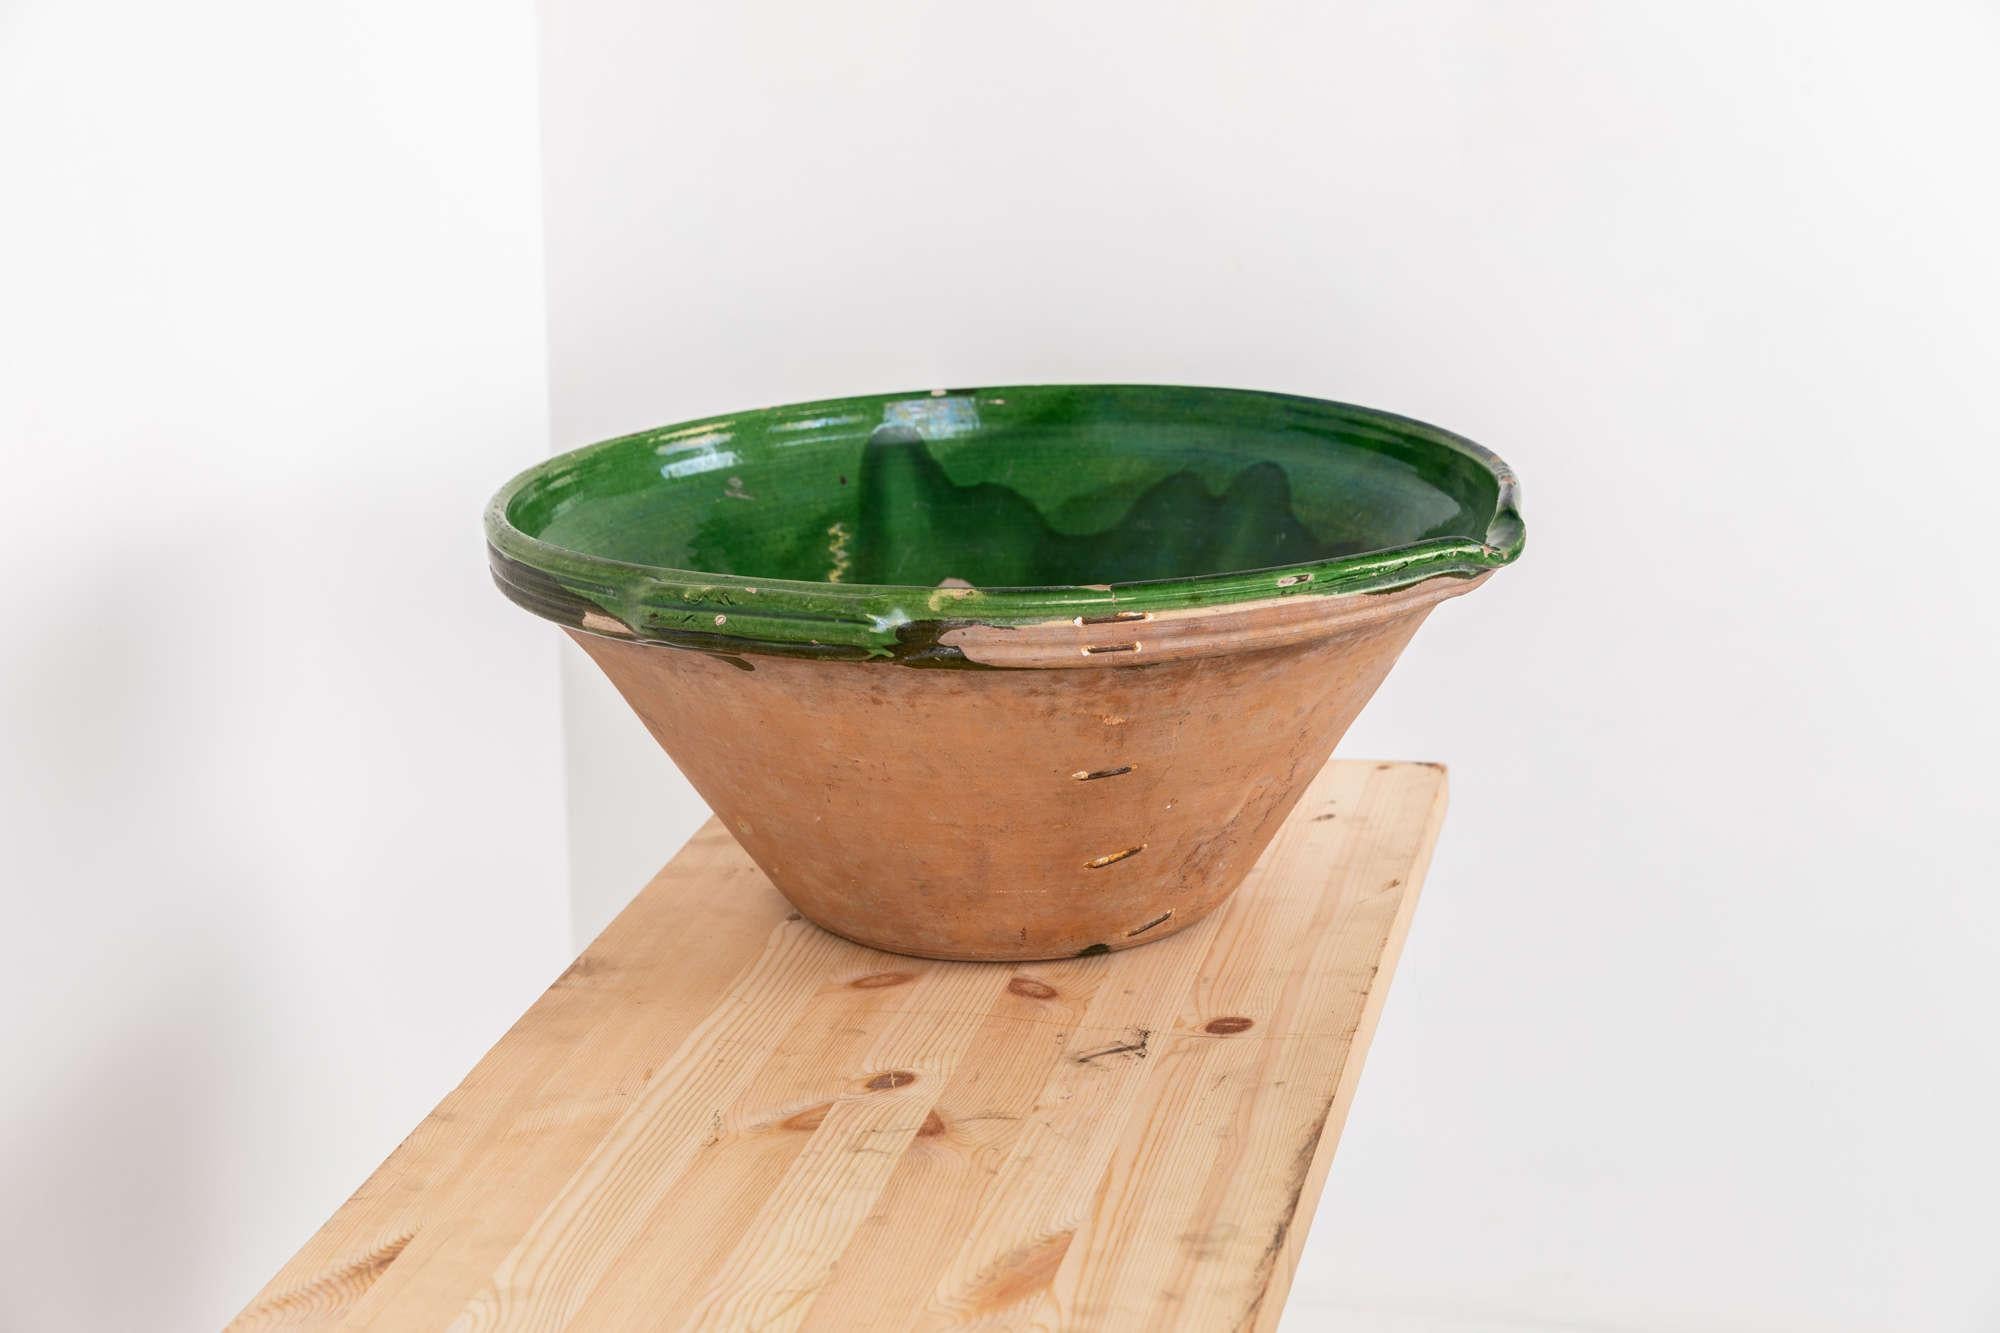 

A very large 19th century dairy bowl. c.1880

Terracotta with beautiful green glazed bowl with wonderful ancient stapled repair. Some minor chipping here and there, but a great decorative item.
